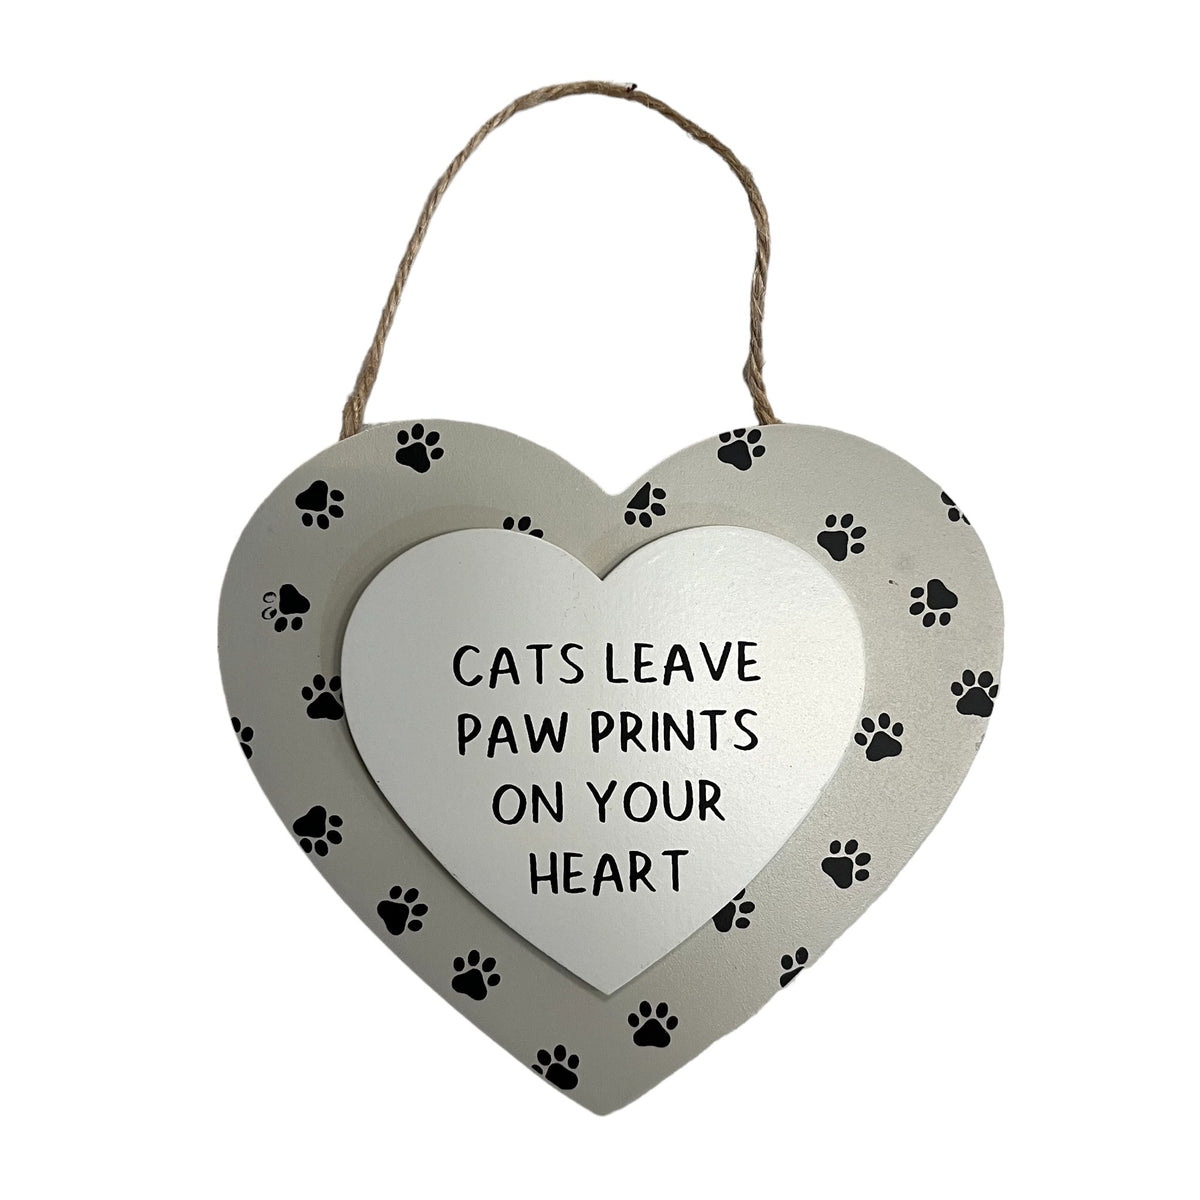 Cats Leave Paw Prints Hanging Heart Sign - Cherish Home